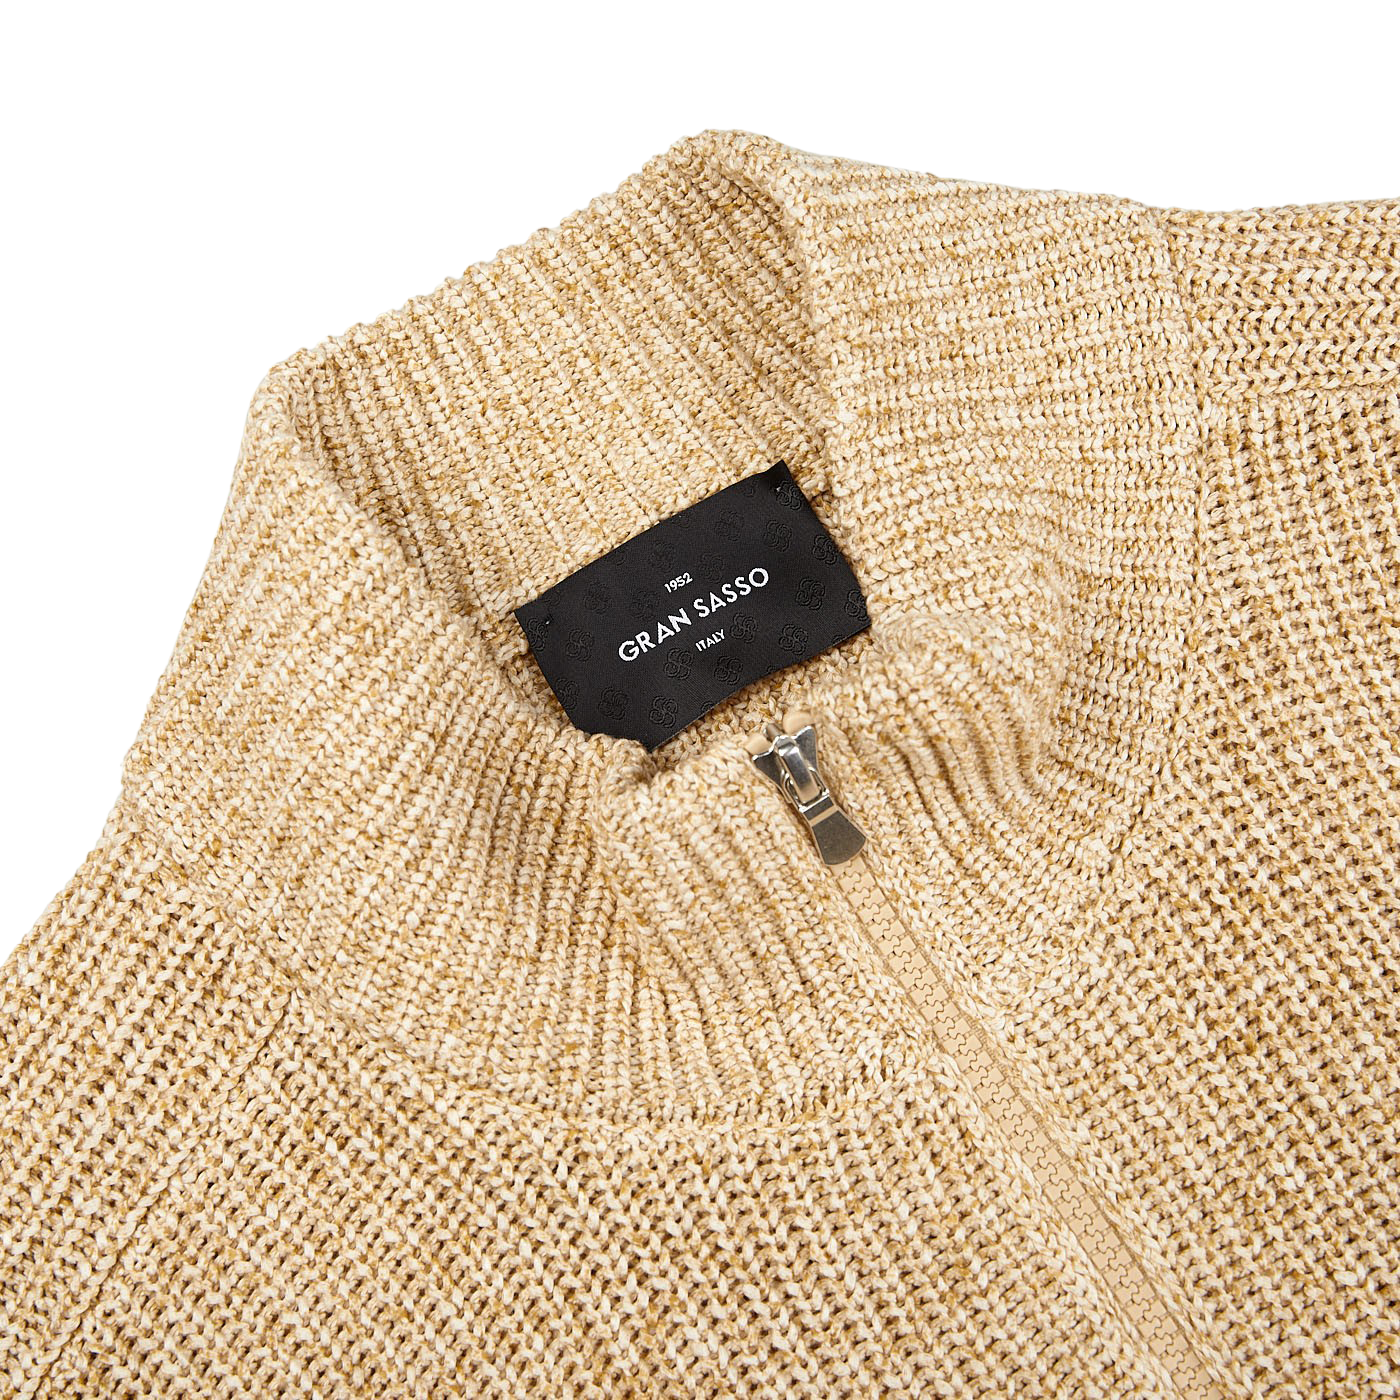 A Gran Sasso Oat Beige Rib Stitch Cotton 1/4 Zip Sweater, crafted from rib-stitch pure cotton with a label on it.